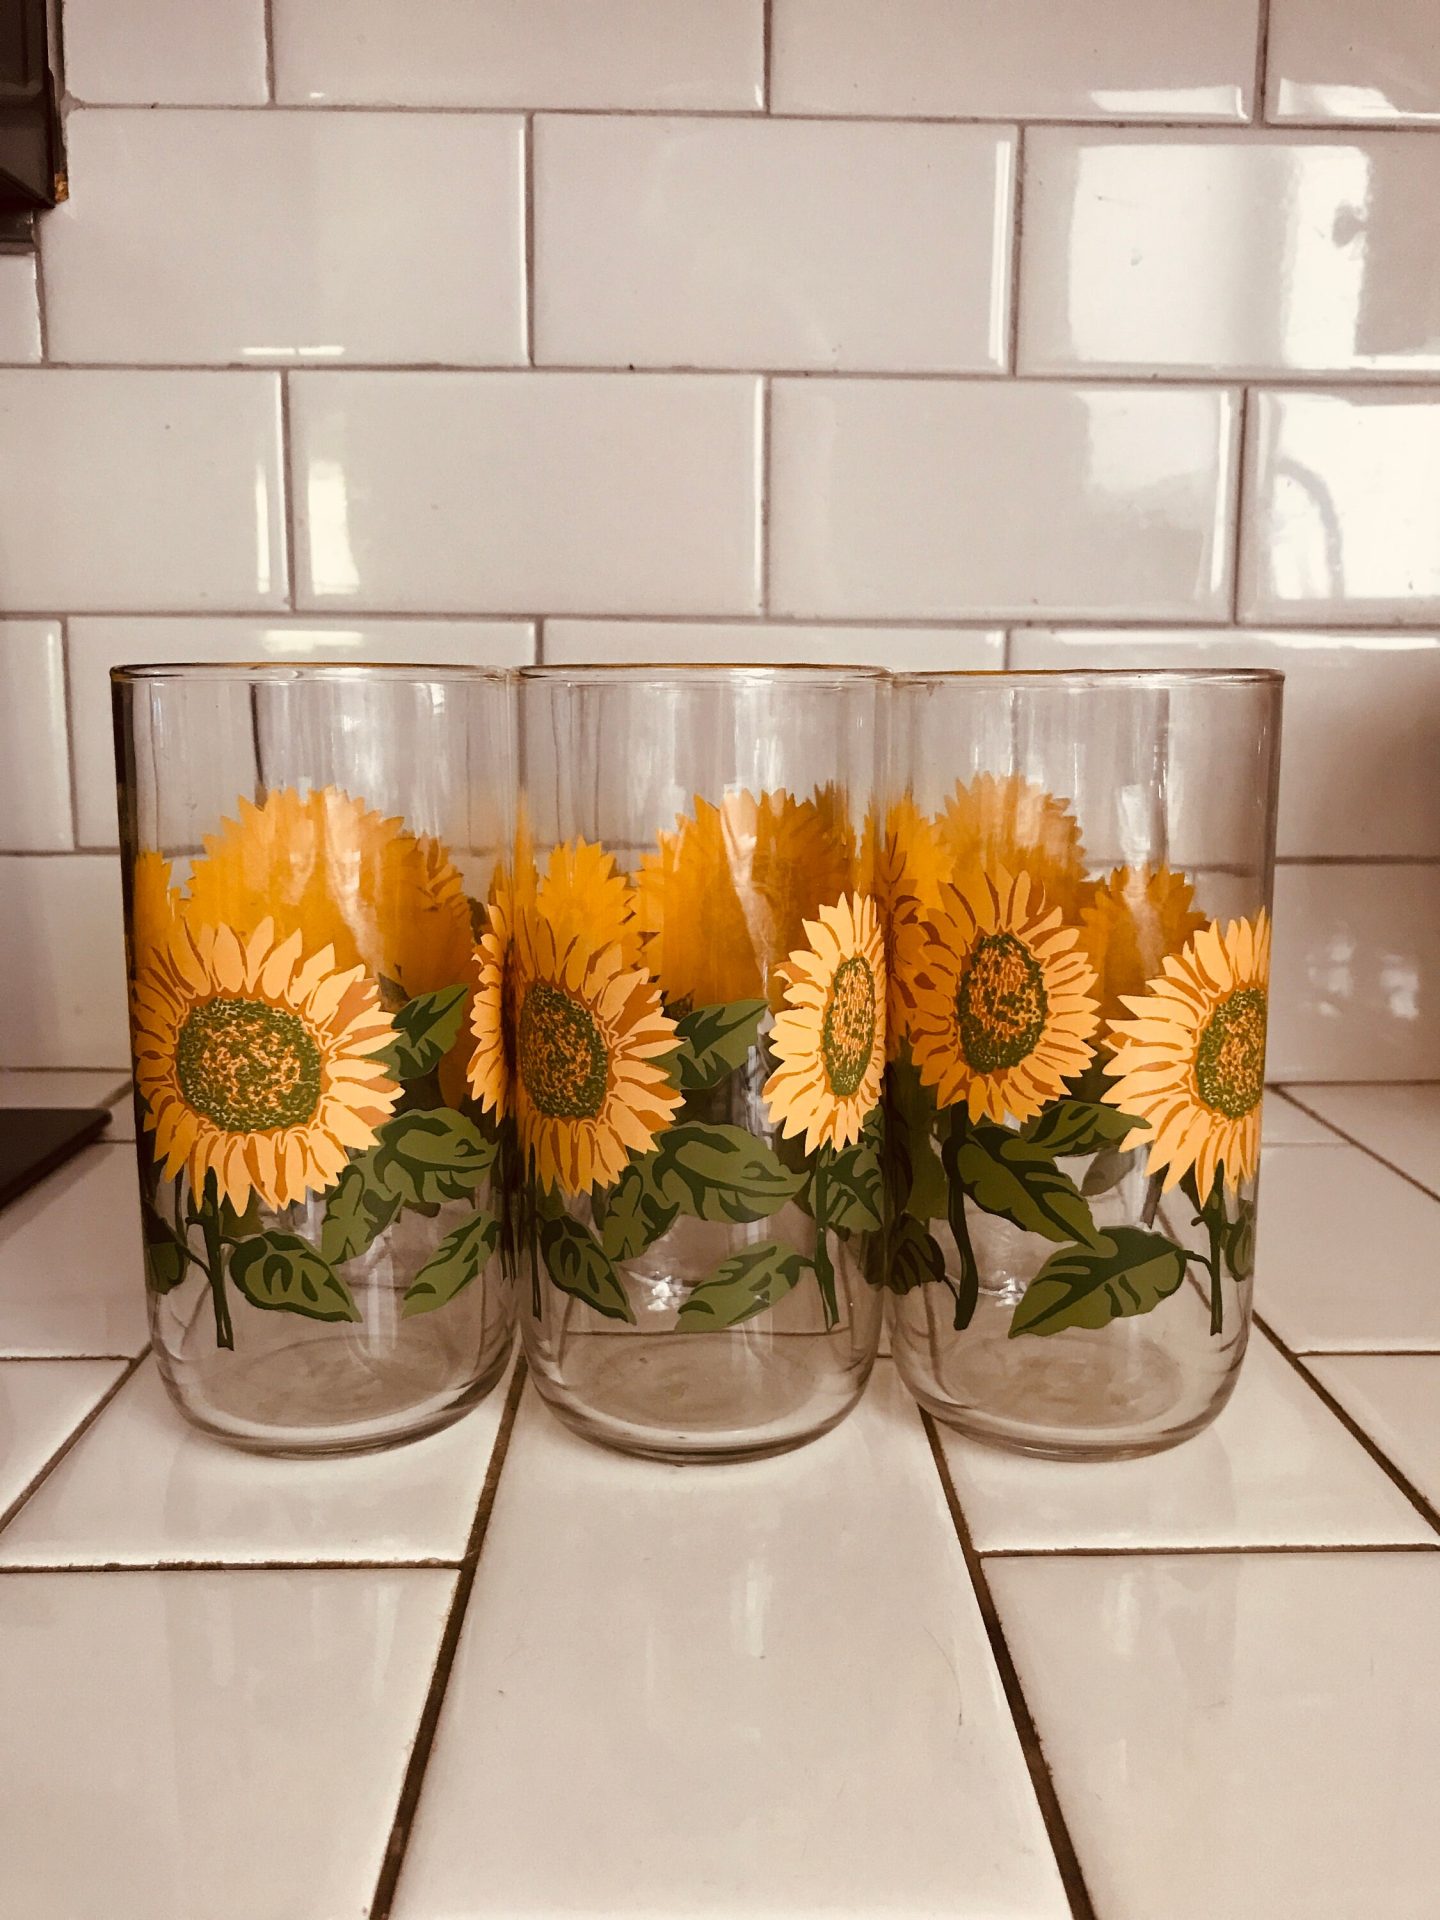 https://www.truevintageantiques.com/wp-content/uploads/2022/05/vintage-sunflower-glasses-tumblers-libby-with-large-yellow-sunflowers-collectible-display-home-decor-kitchen-drinkware-629170552-scaled.jpg